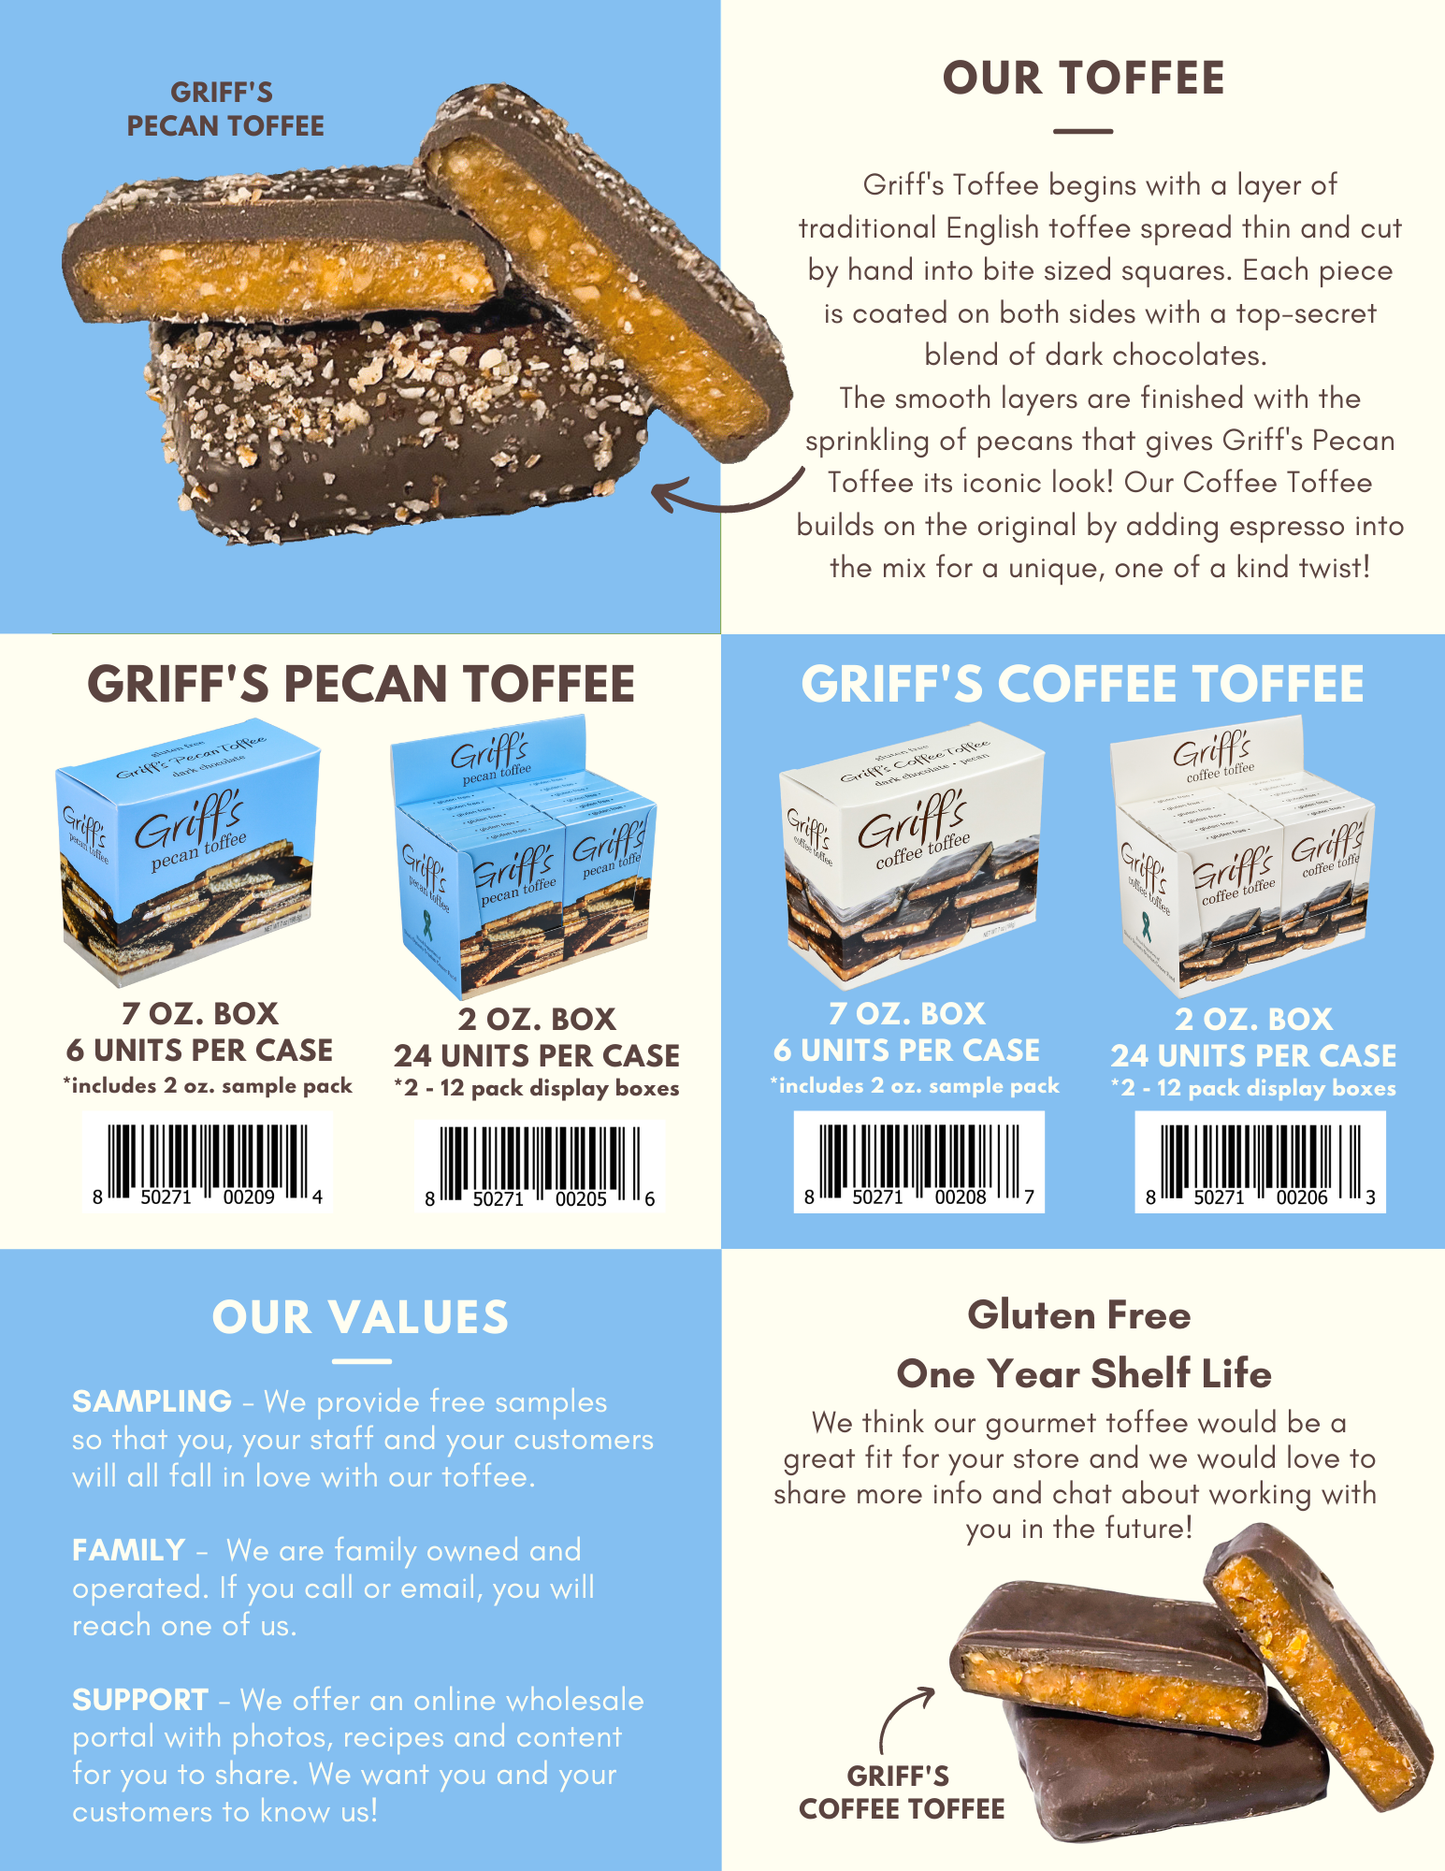 Griff's Pecan Toffee - Sample Pack (not for resale)